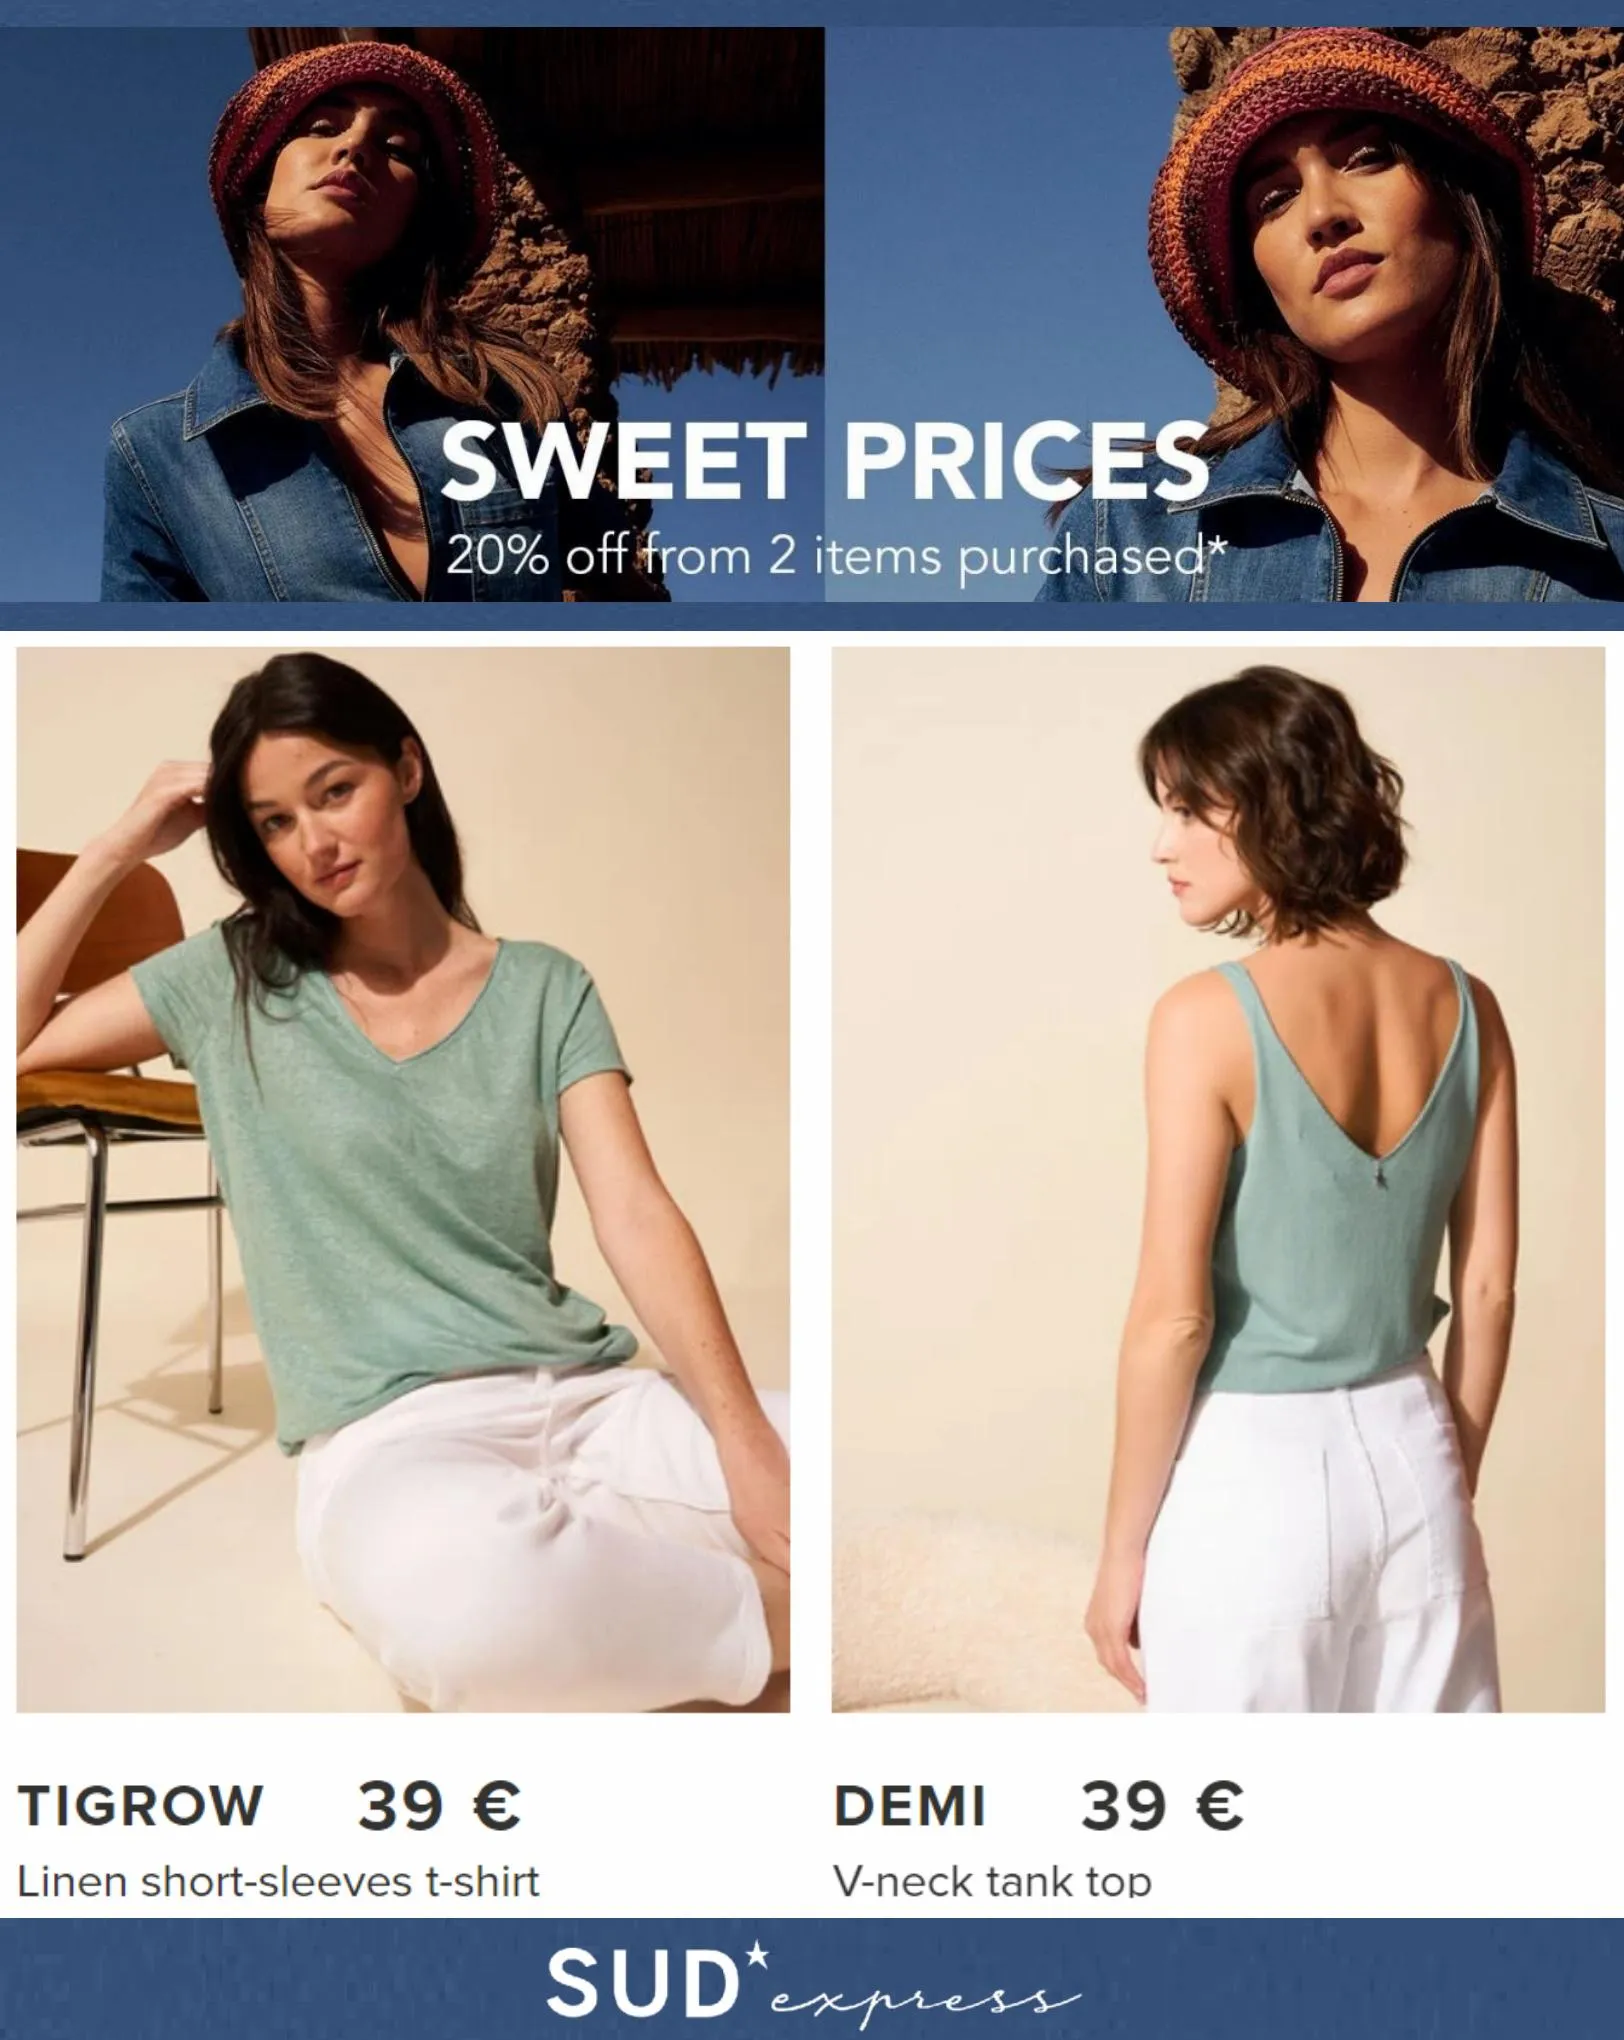 Catalogue Sweet Prices 20% Off from 2 Pieces*, page 00002